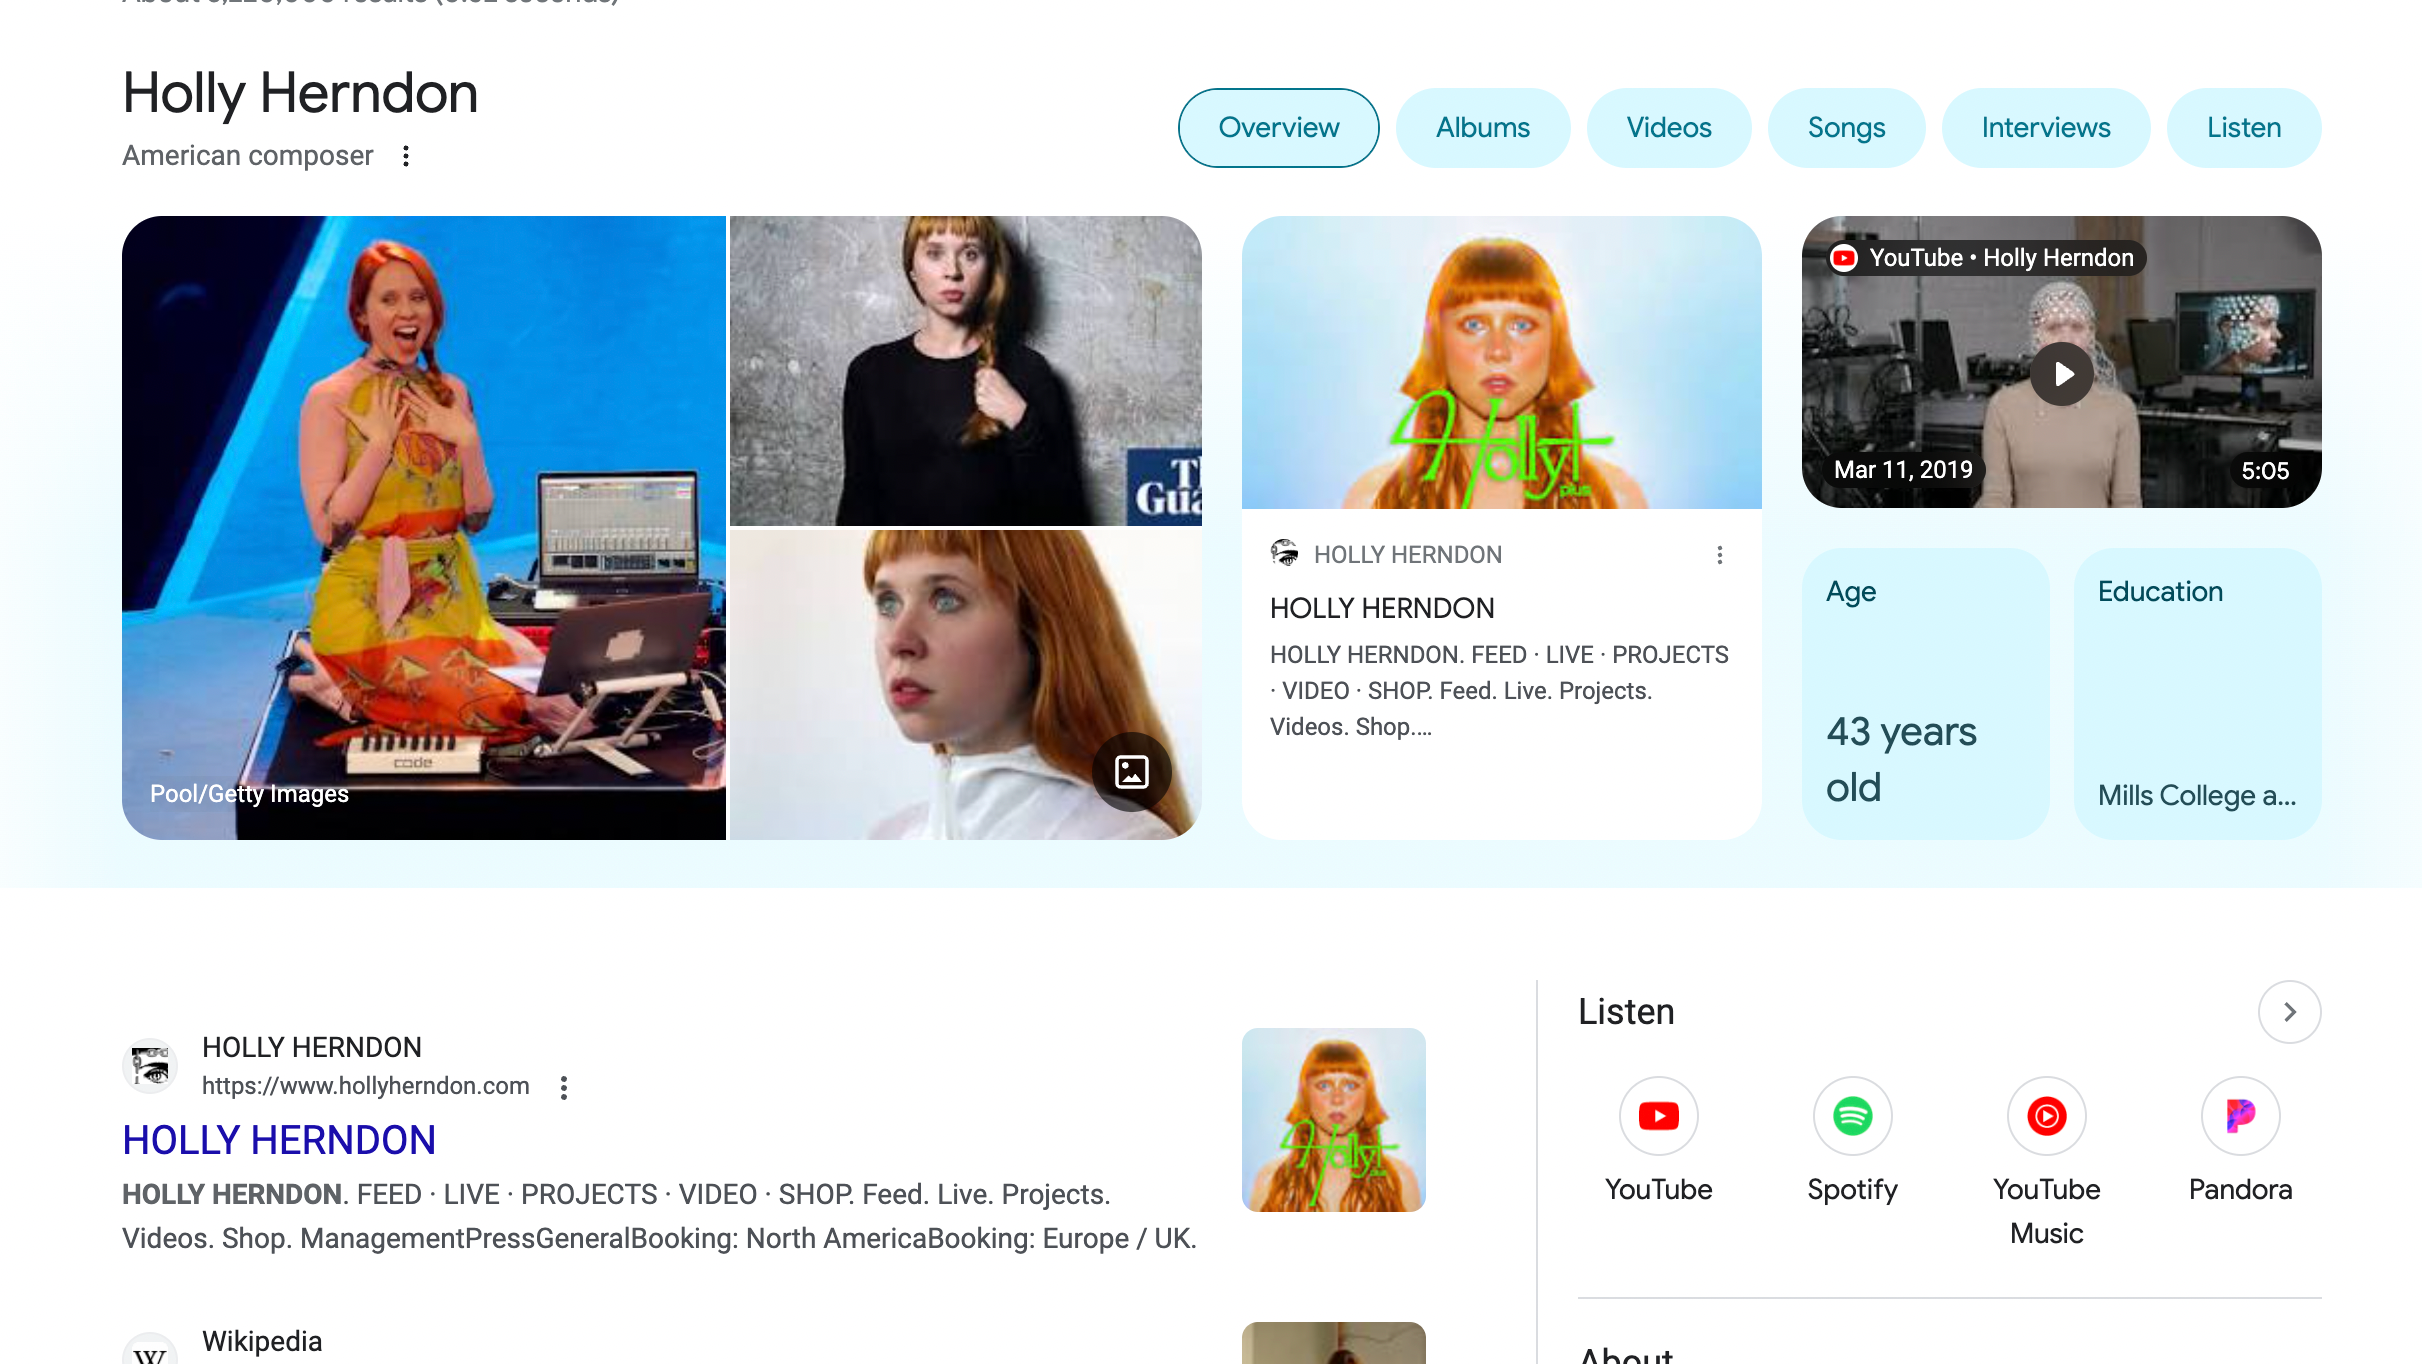 Google Image results for typing in Holly Herndon.